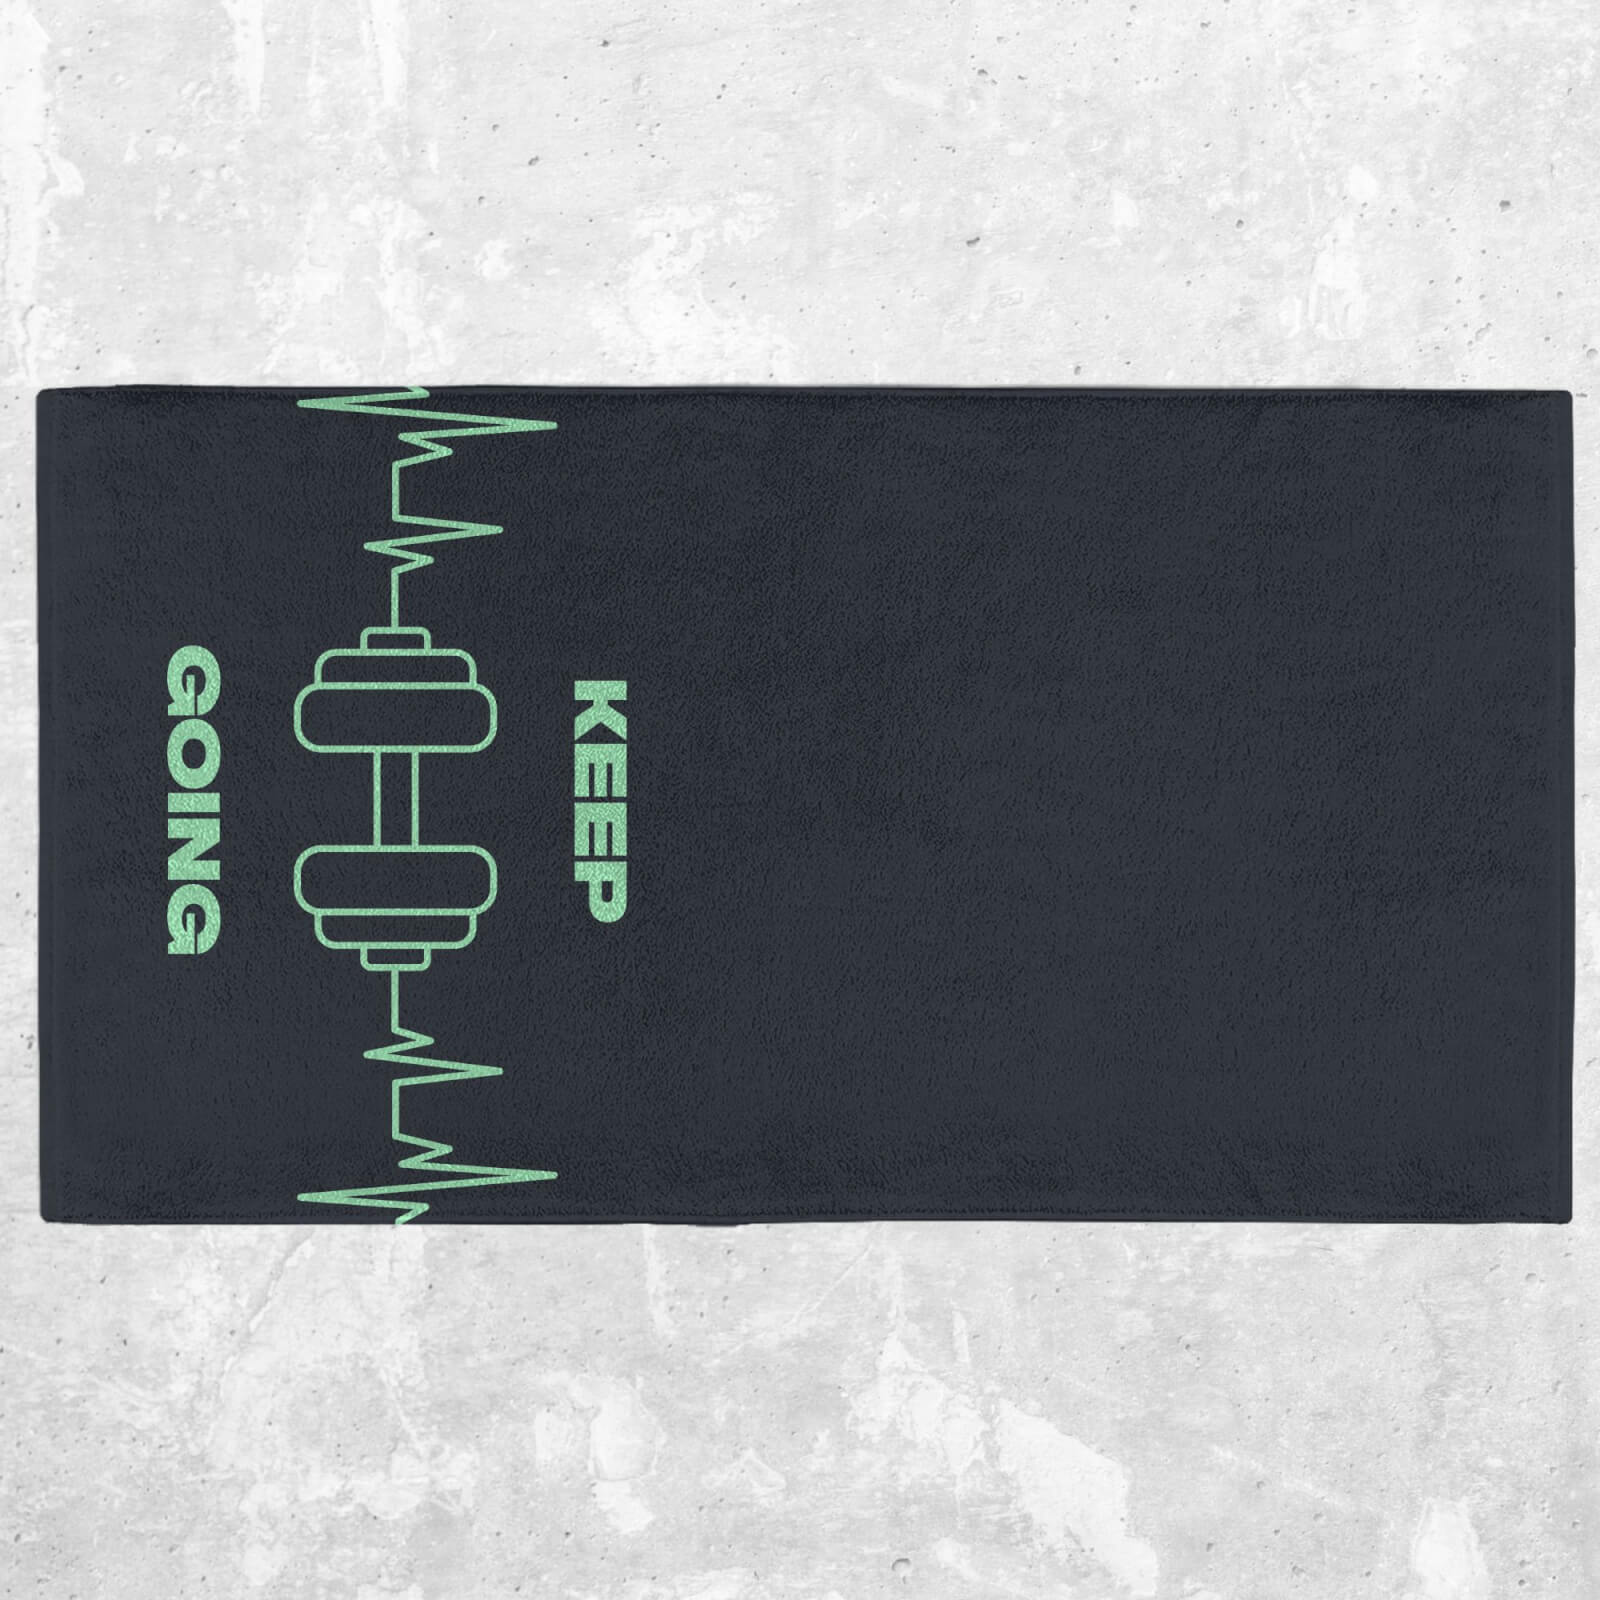 Keep Going With Your Weights Fitness Towel